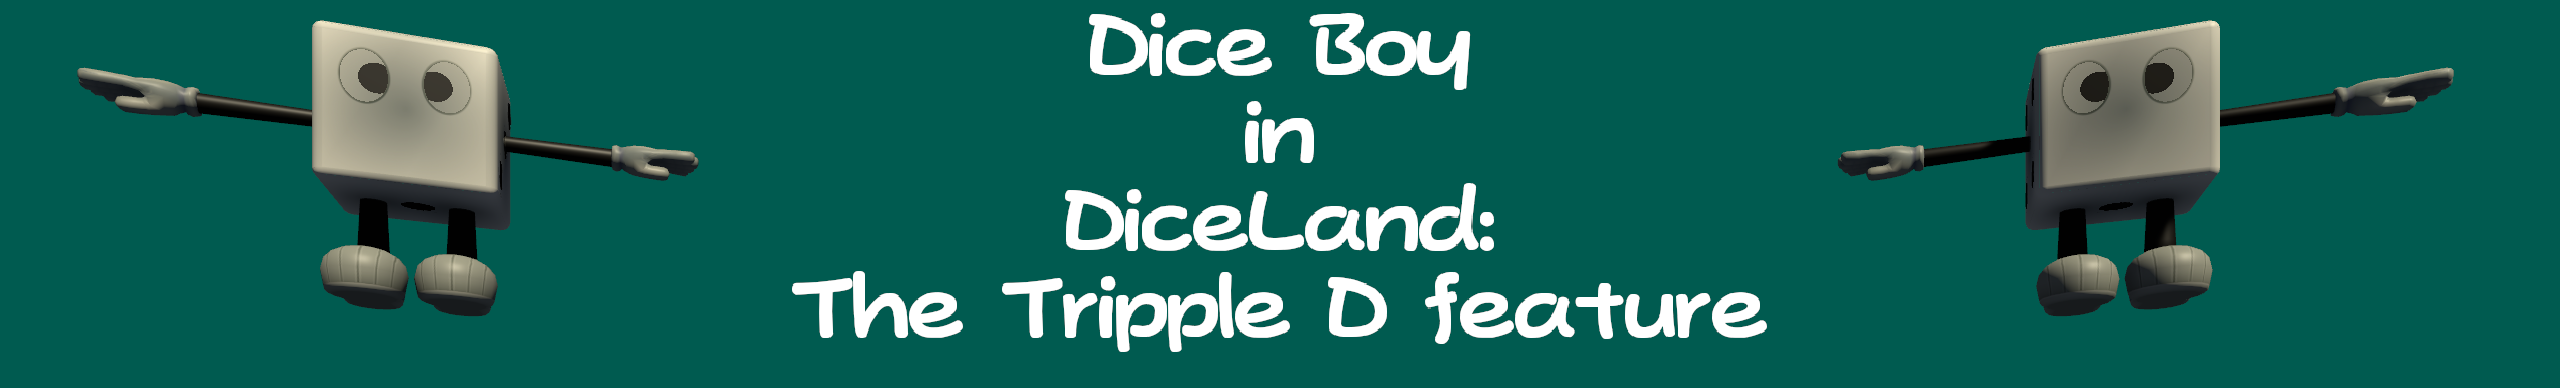 Dice boy in Diceland: The Tripple D feature